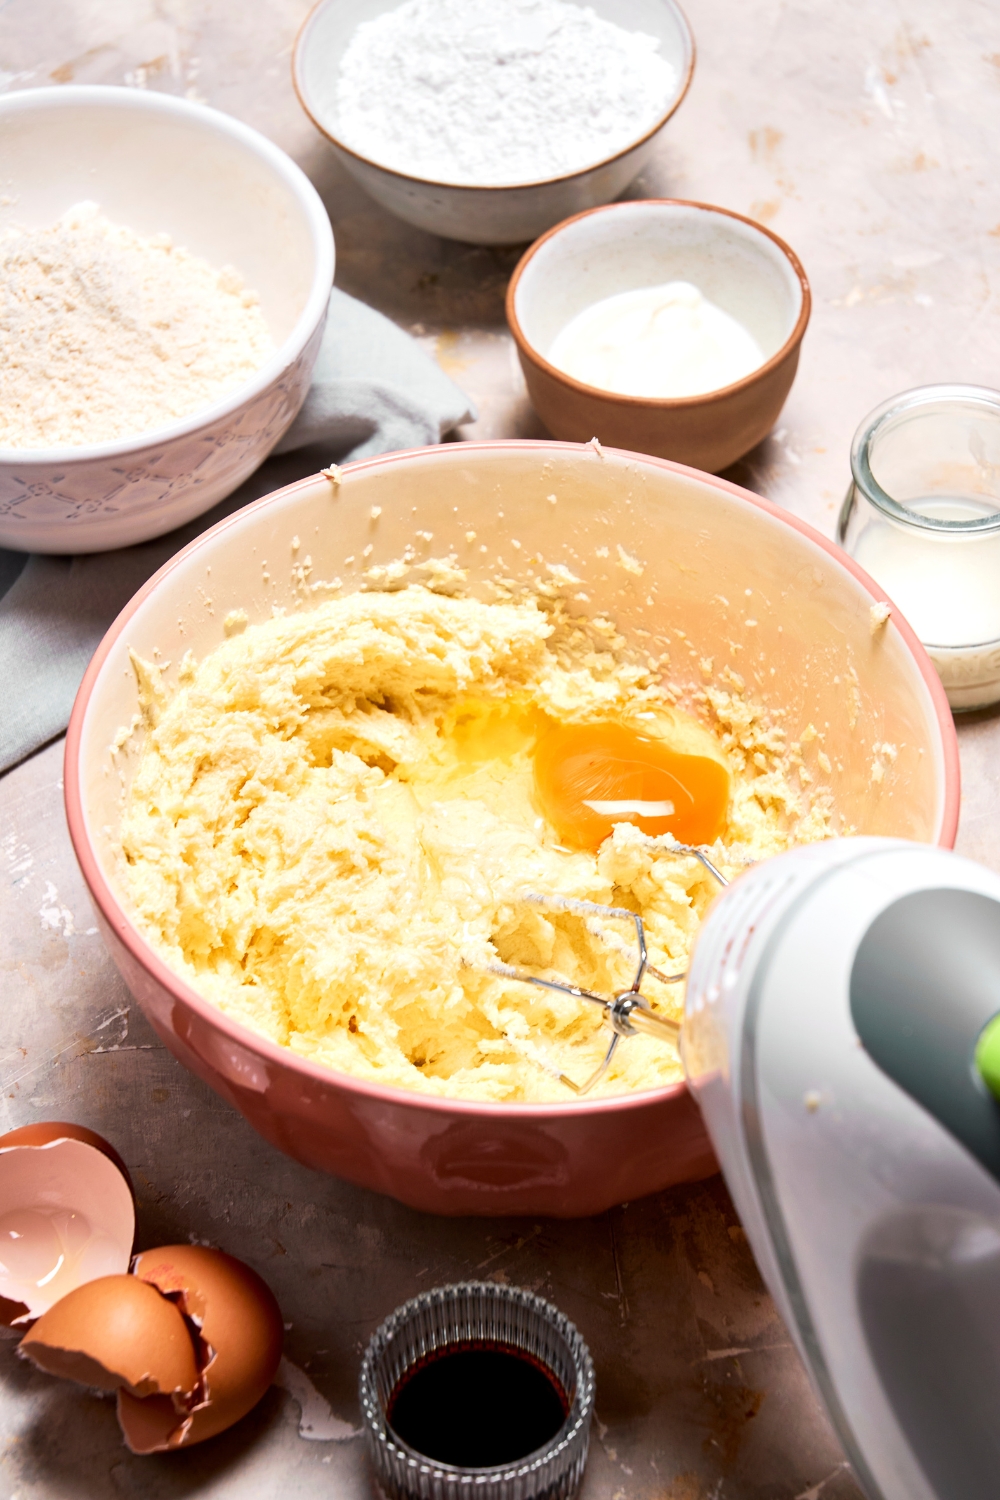 A mixing bowl with the creamed butter and an egg being beaten into it.